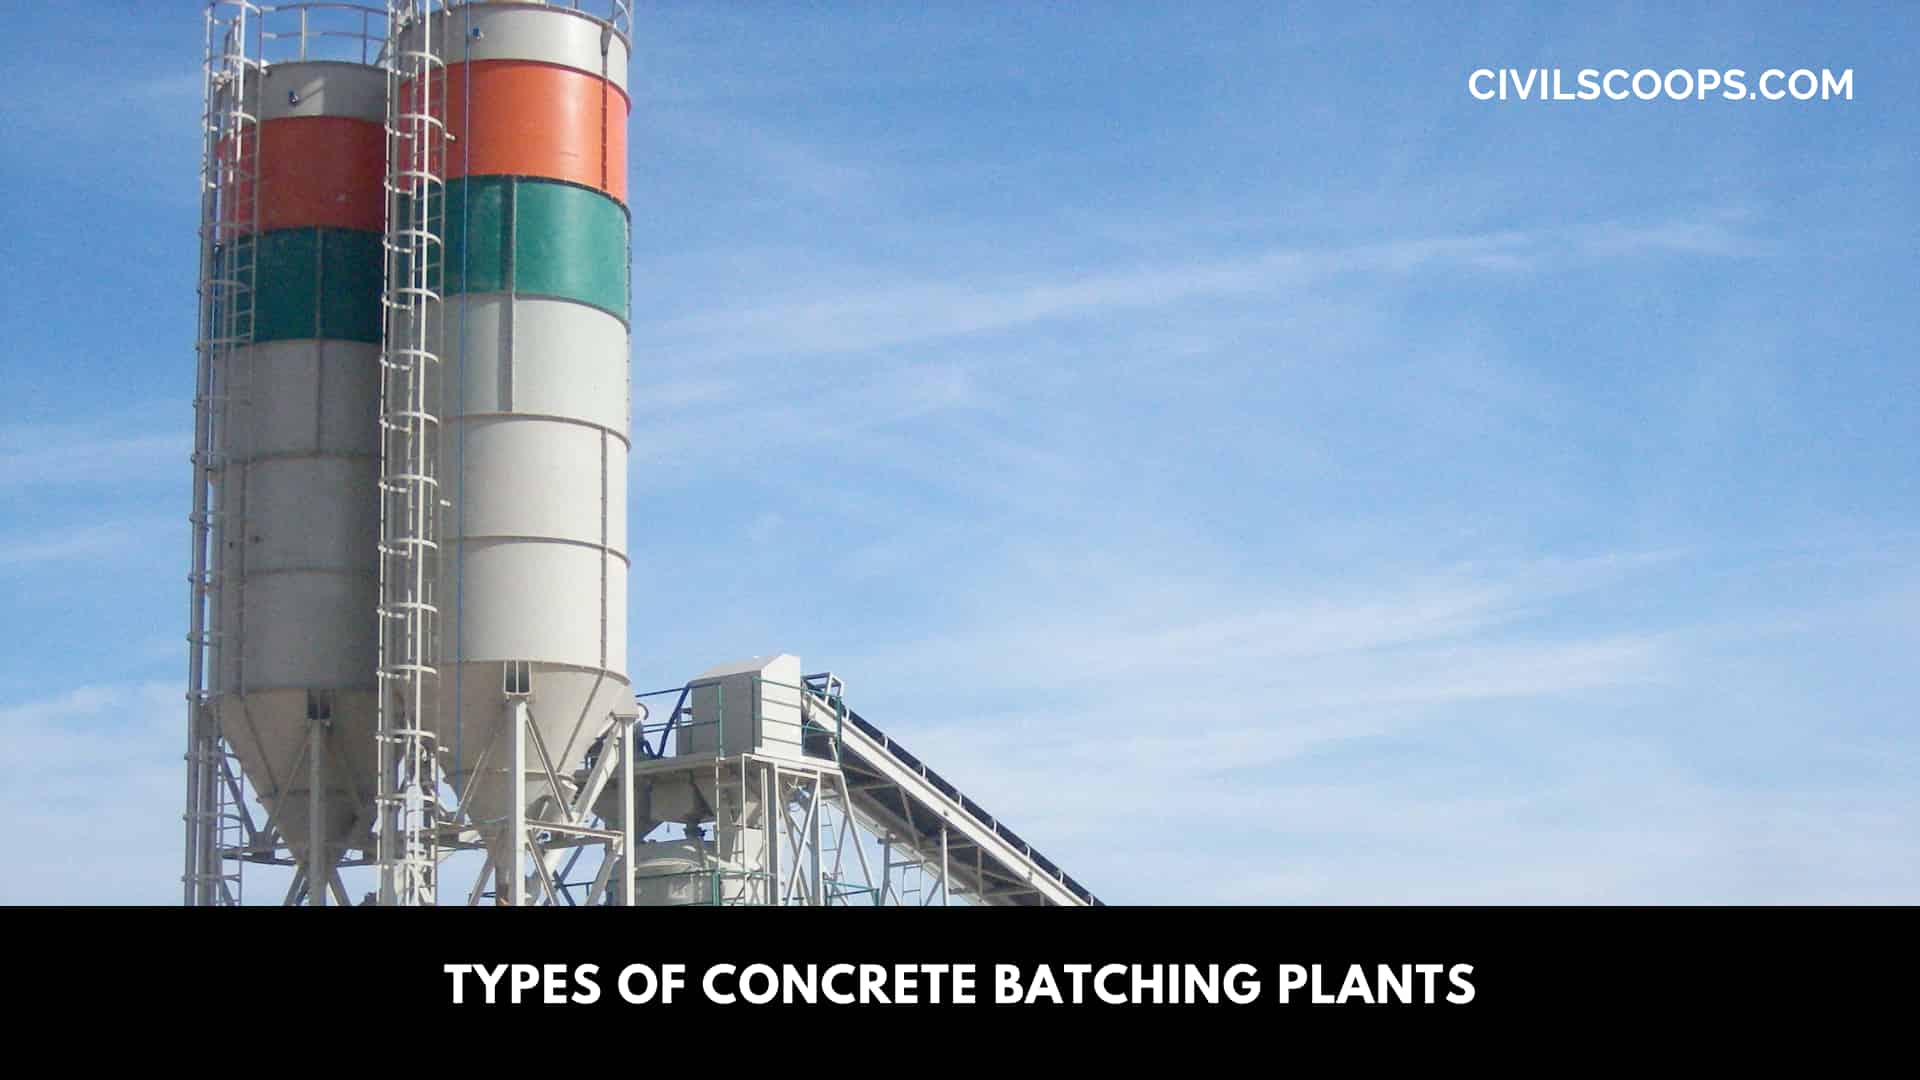 Types of Concrete Batching Plants